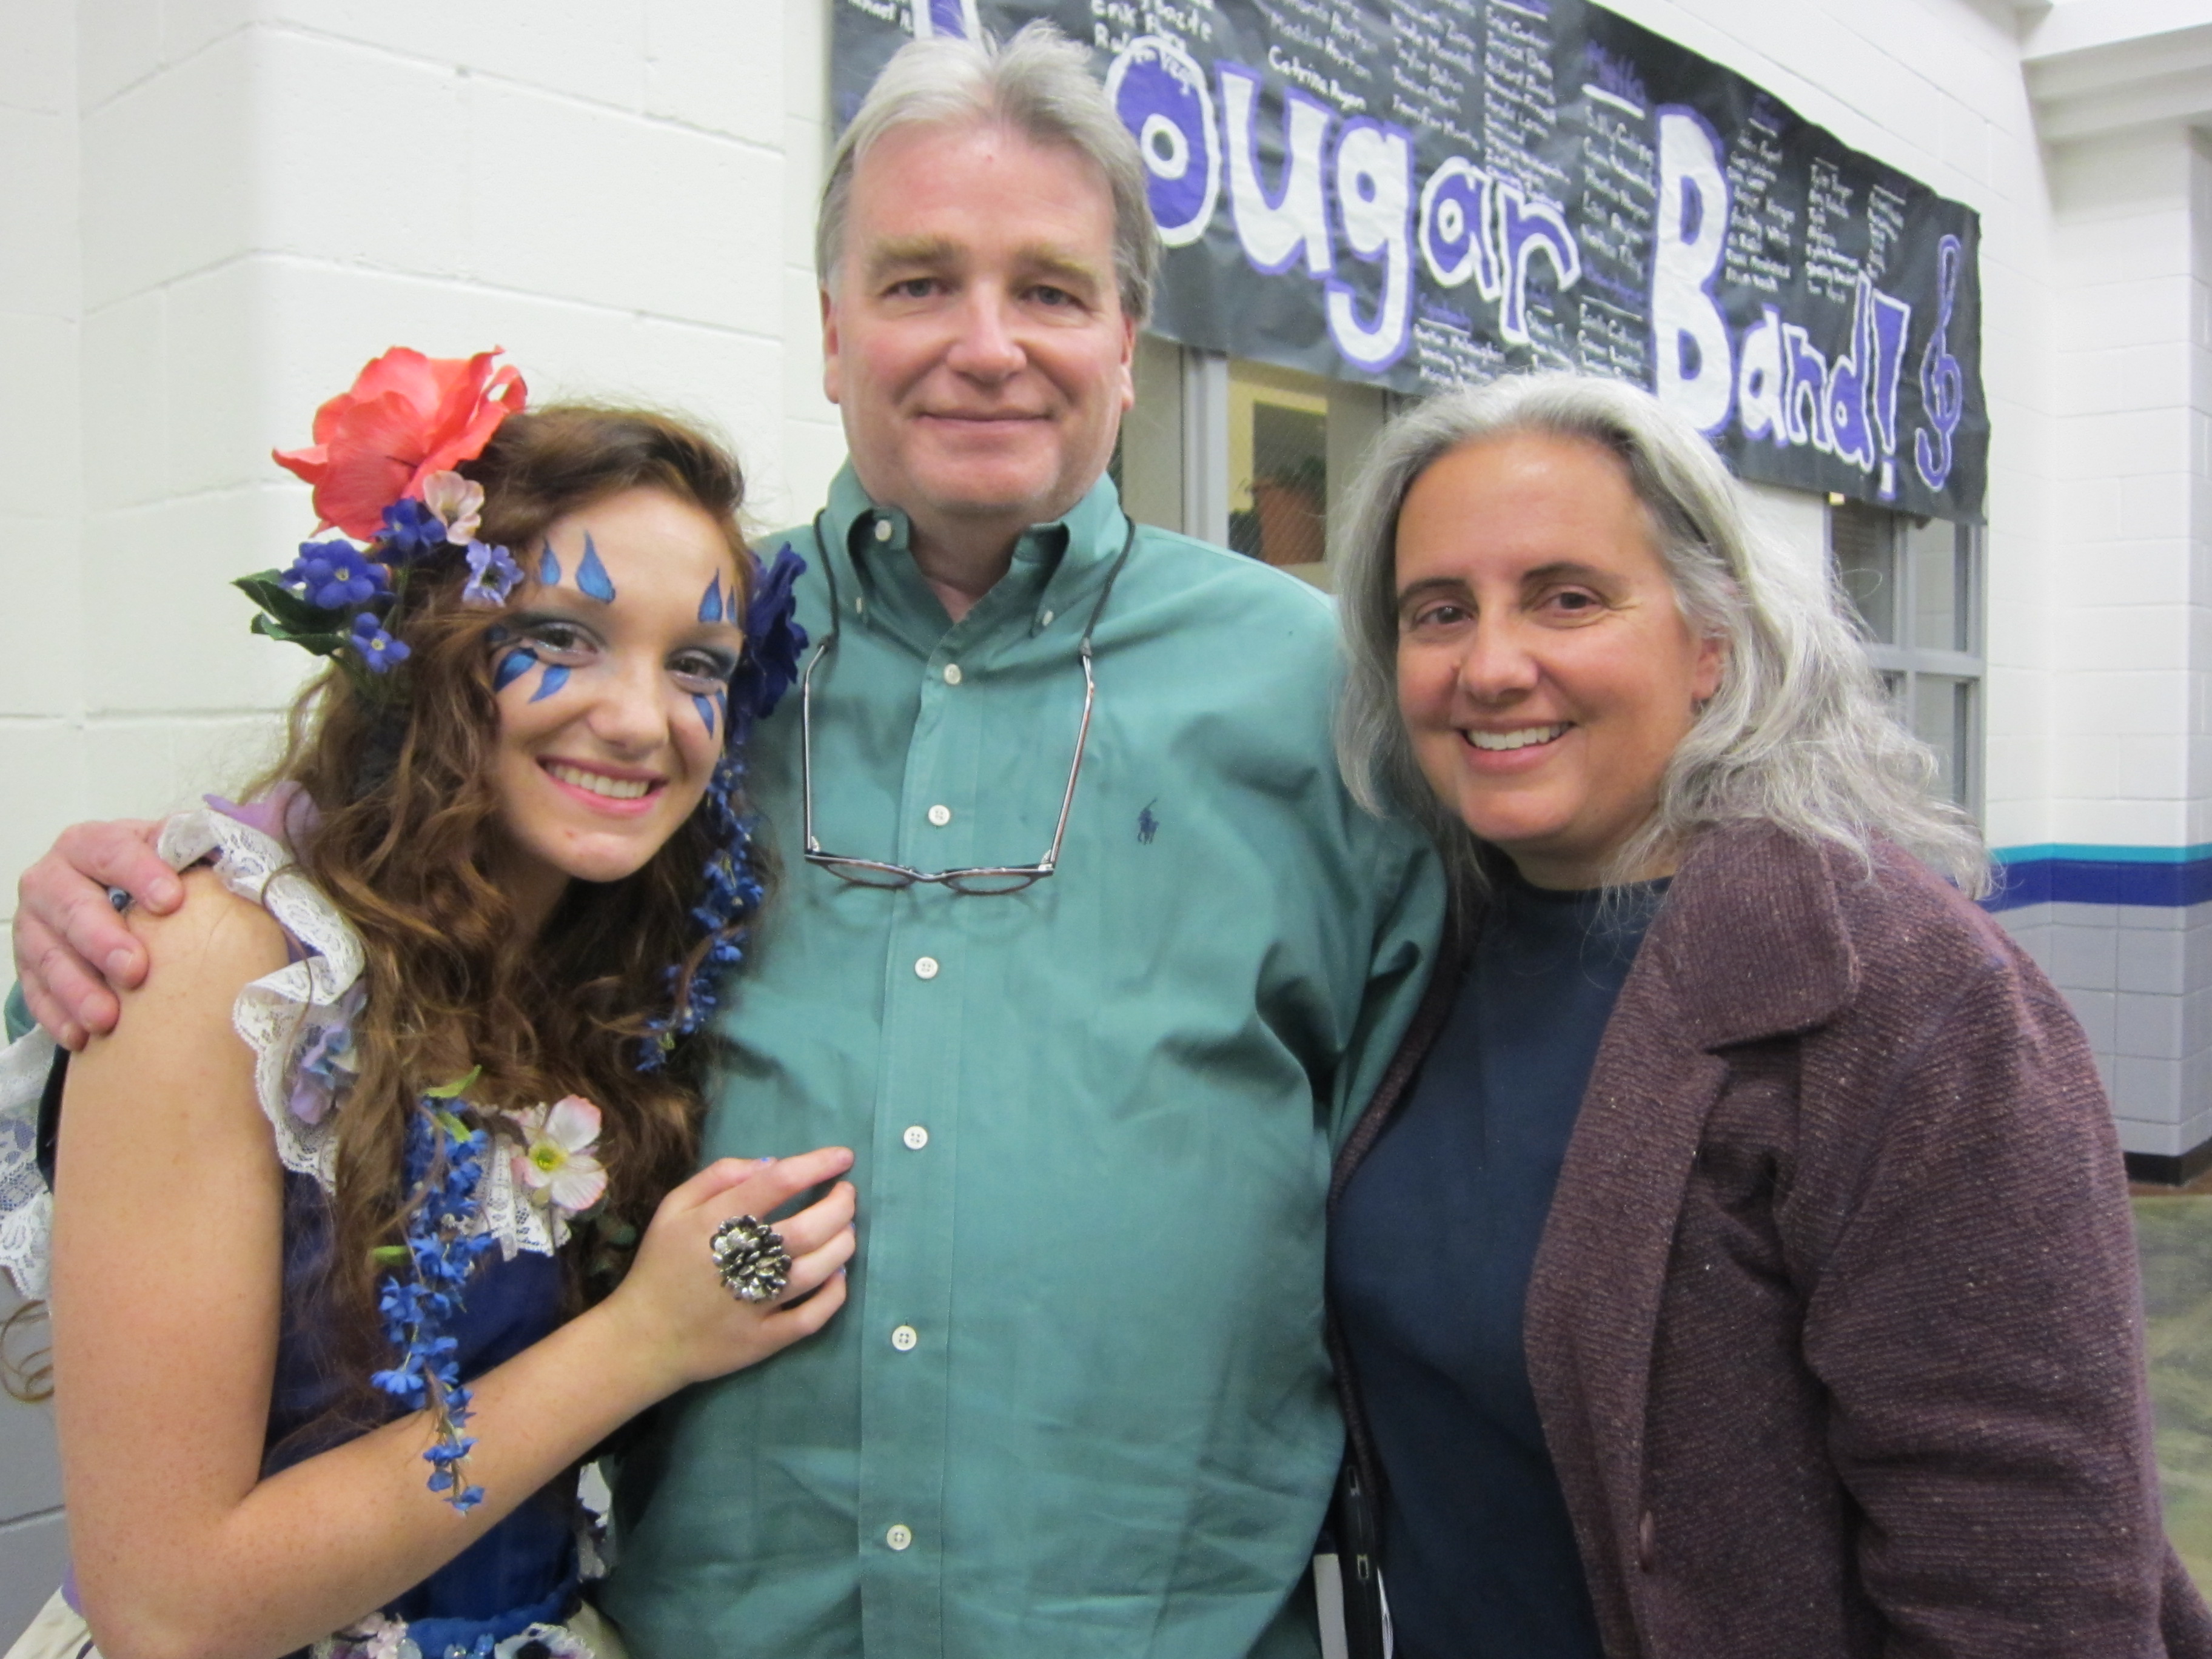 Jaesa, Deana and Dale at A Midsummer Nights' Dream at Spanish Springs High School